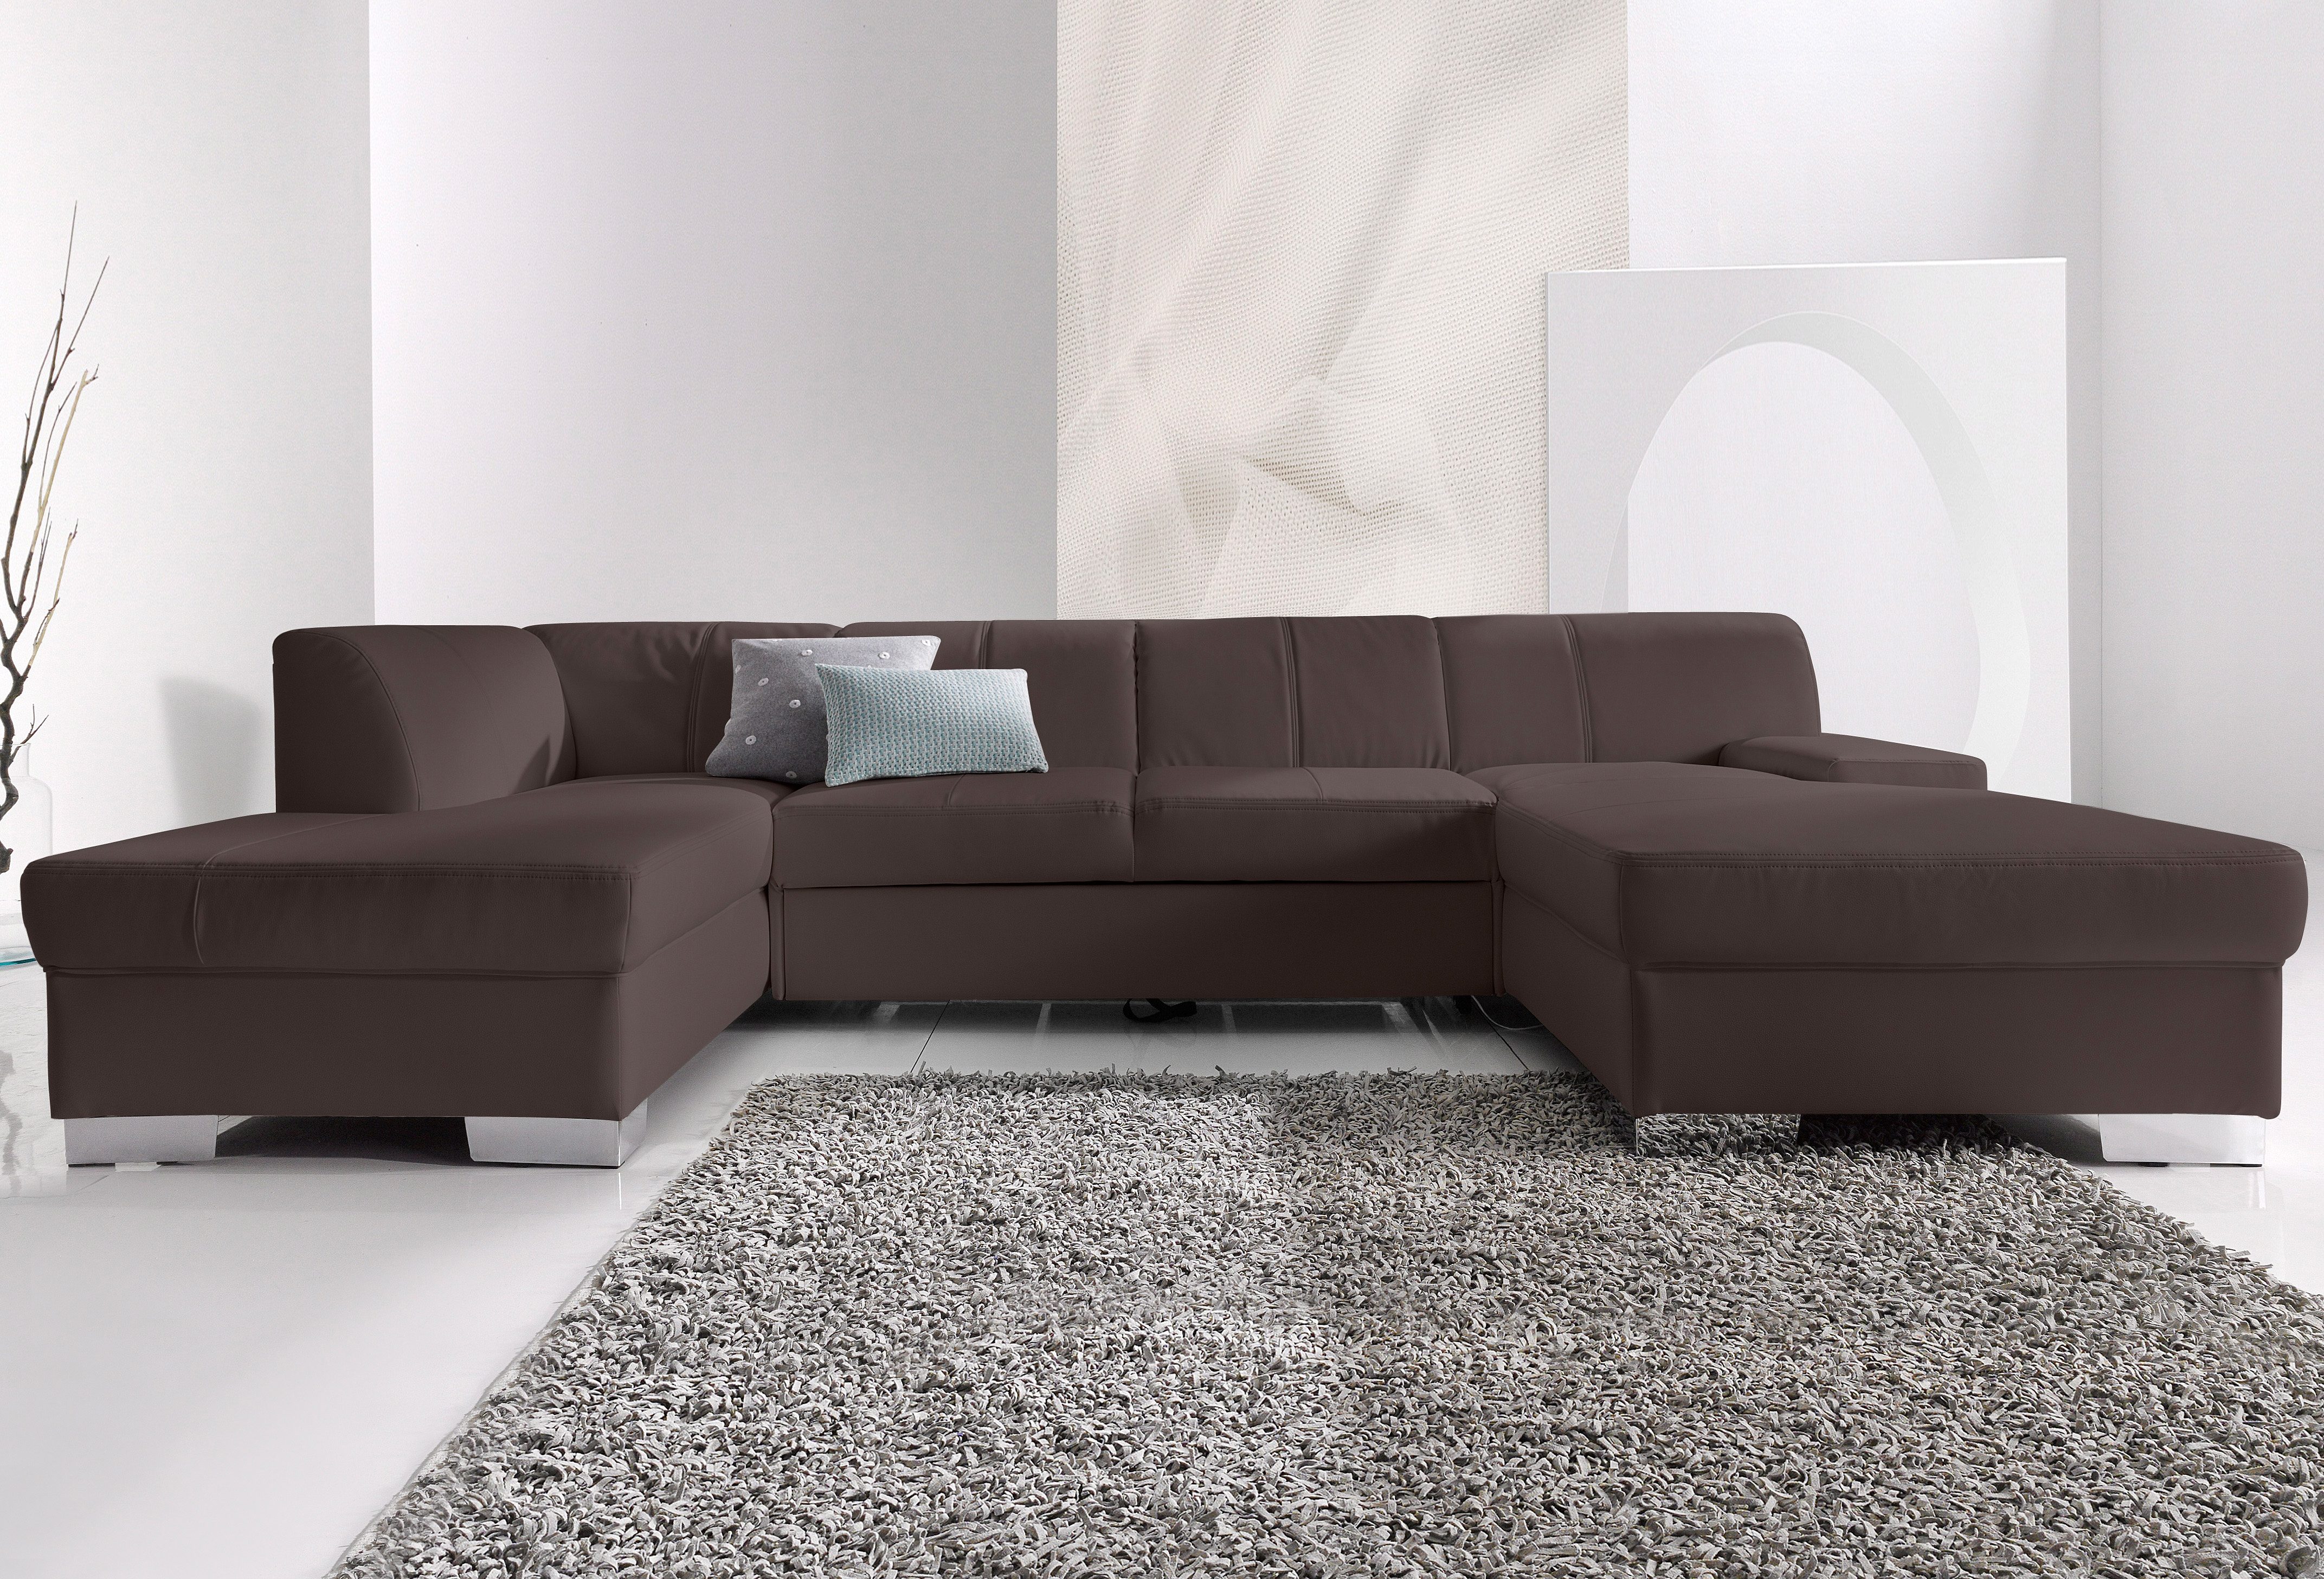 Otto - Domo Collection Hoekbank met chaise longue links of rechts